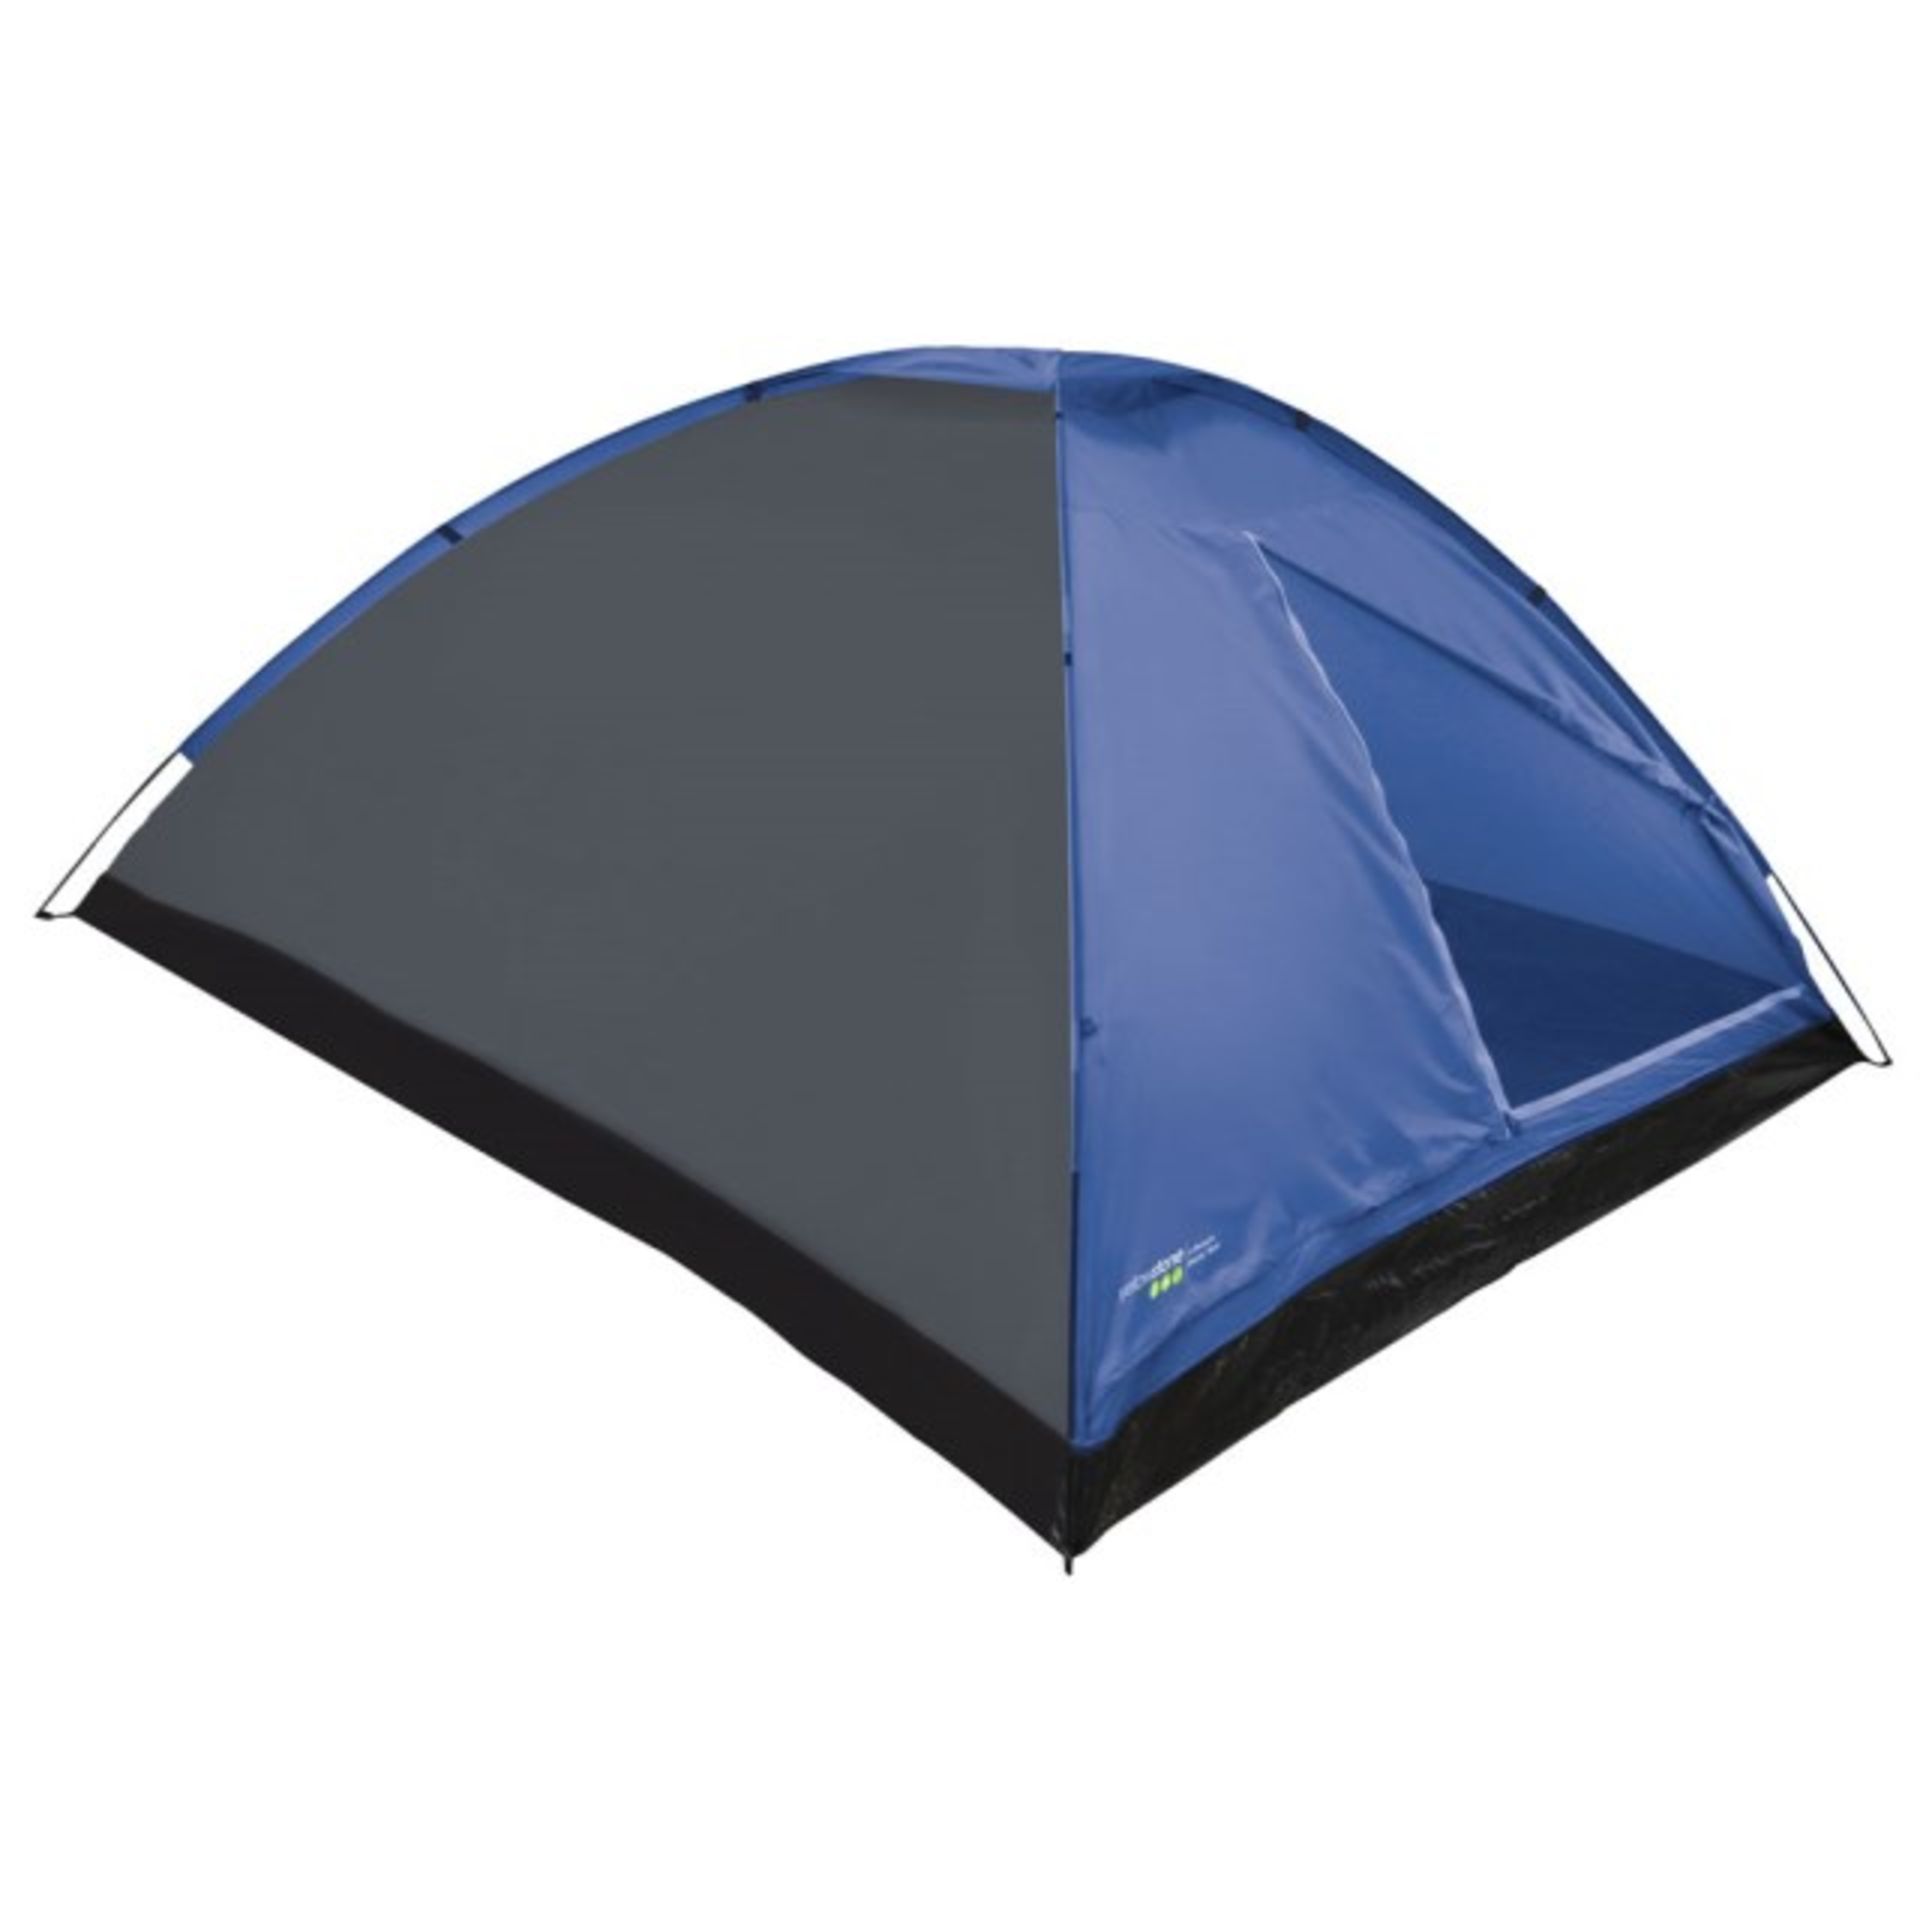 V Brand New 4 Person Dome Tent With Taped seams And Fibreglass Poles RRP25.00